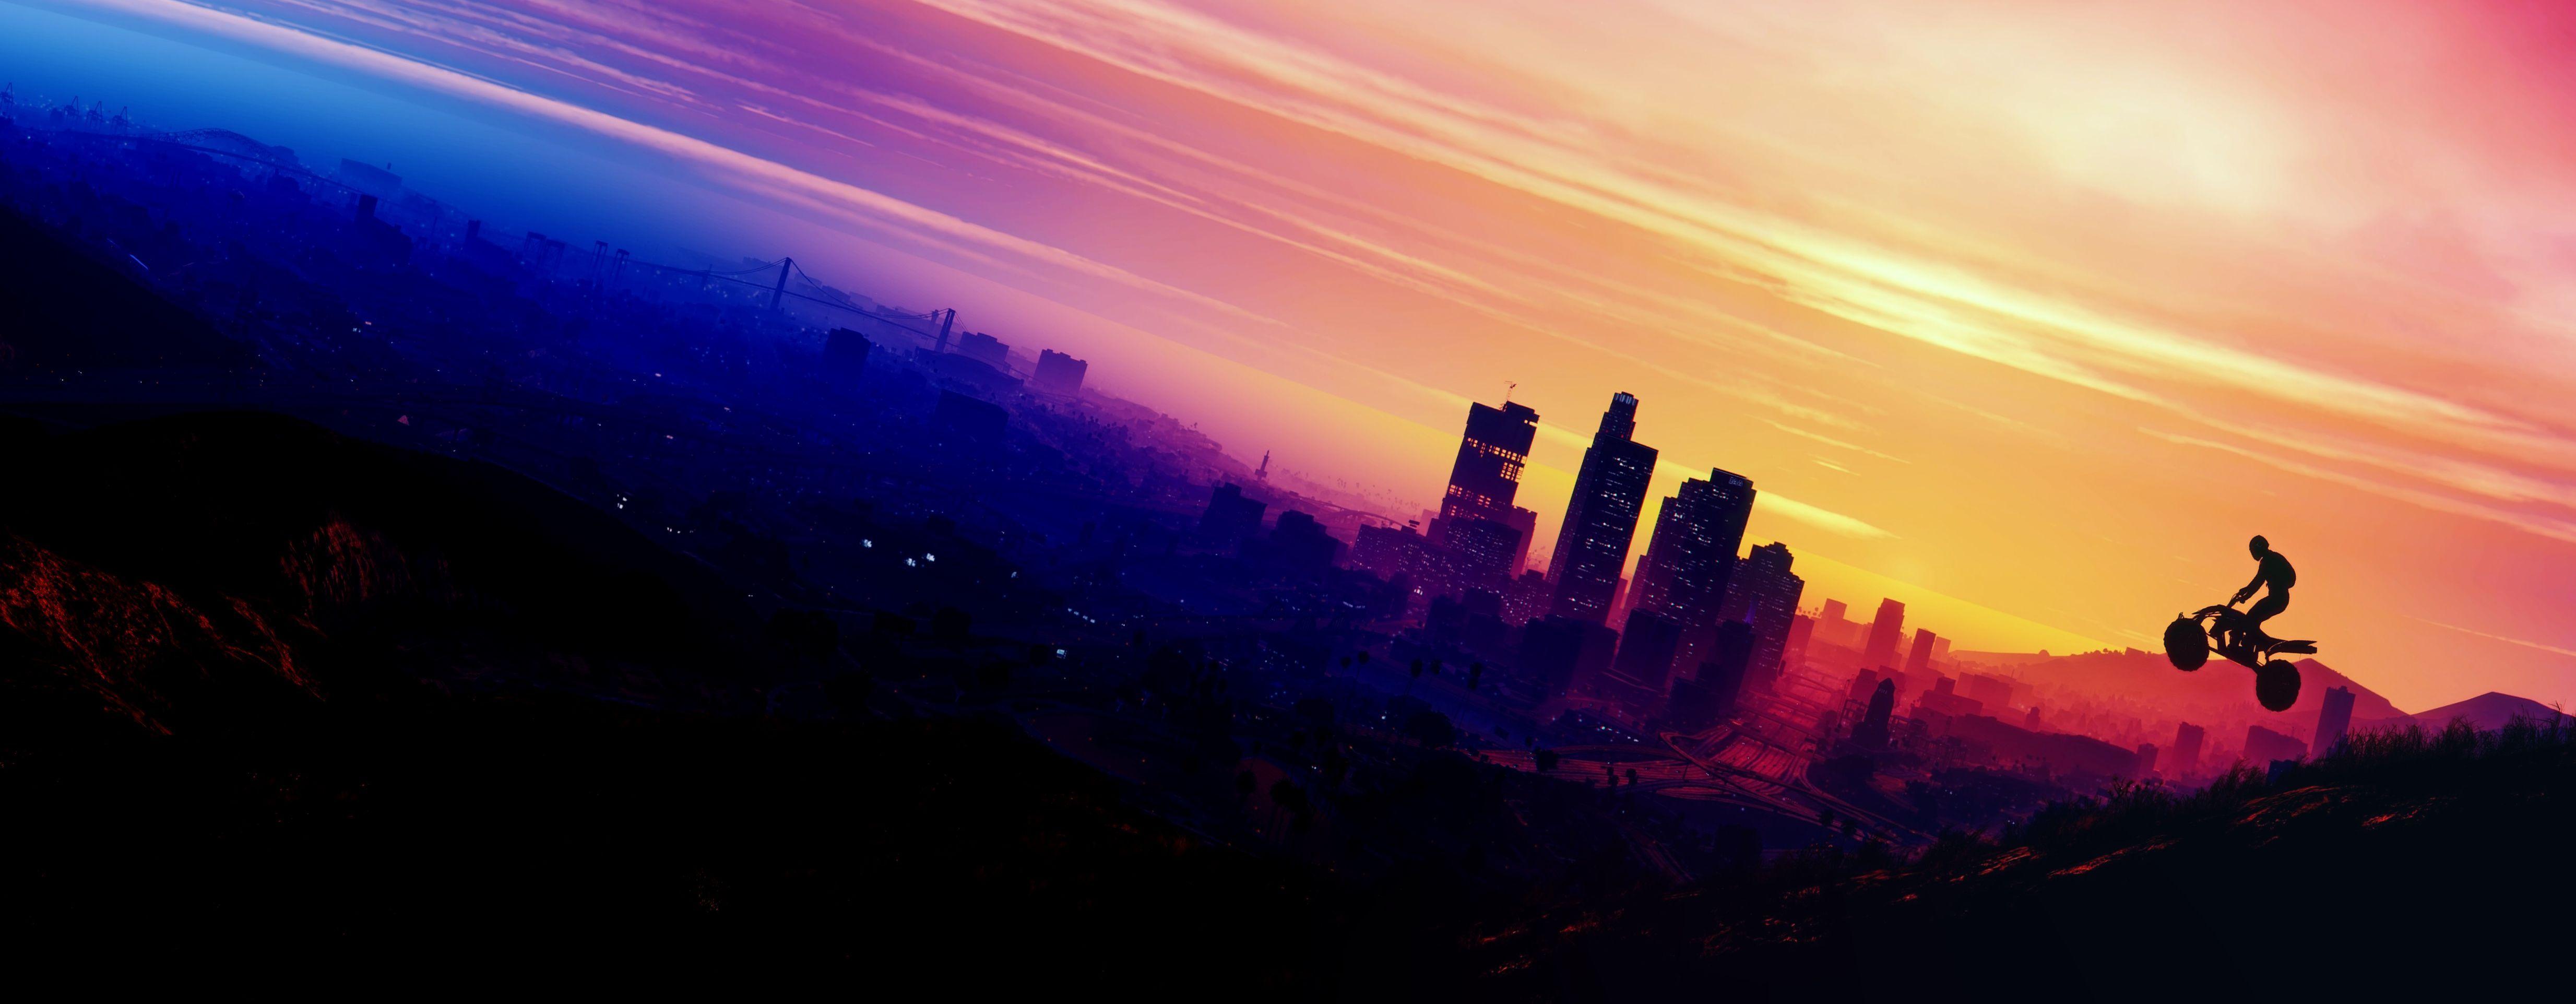 Wallpaper  Core Roleplay Grand Theft Auto Grand Theft Auto V  roleplaying FiveM city 1920x1080  Cpet1329  1854767  HD Wallpapers   WallHere